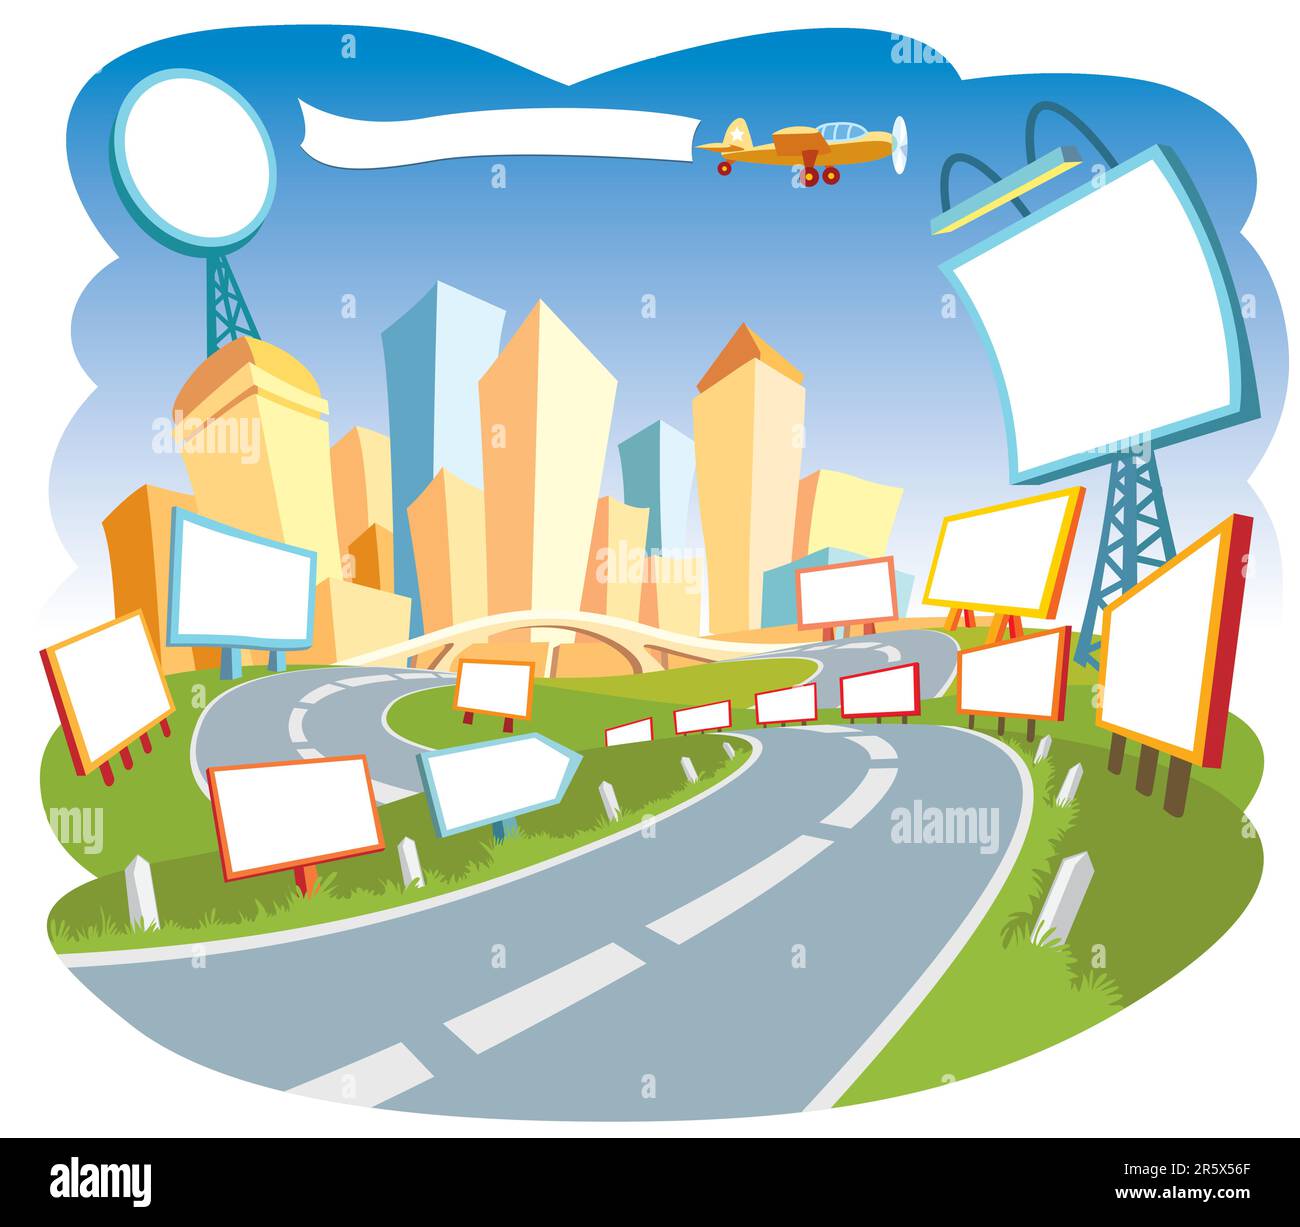 Road to a city center, nice template for a web page. Stock Vector